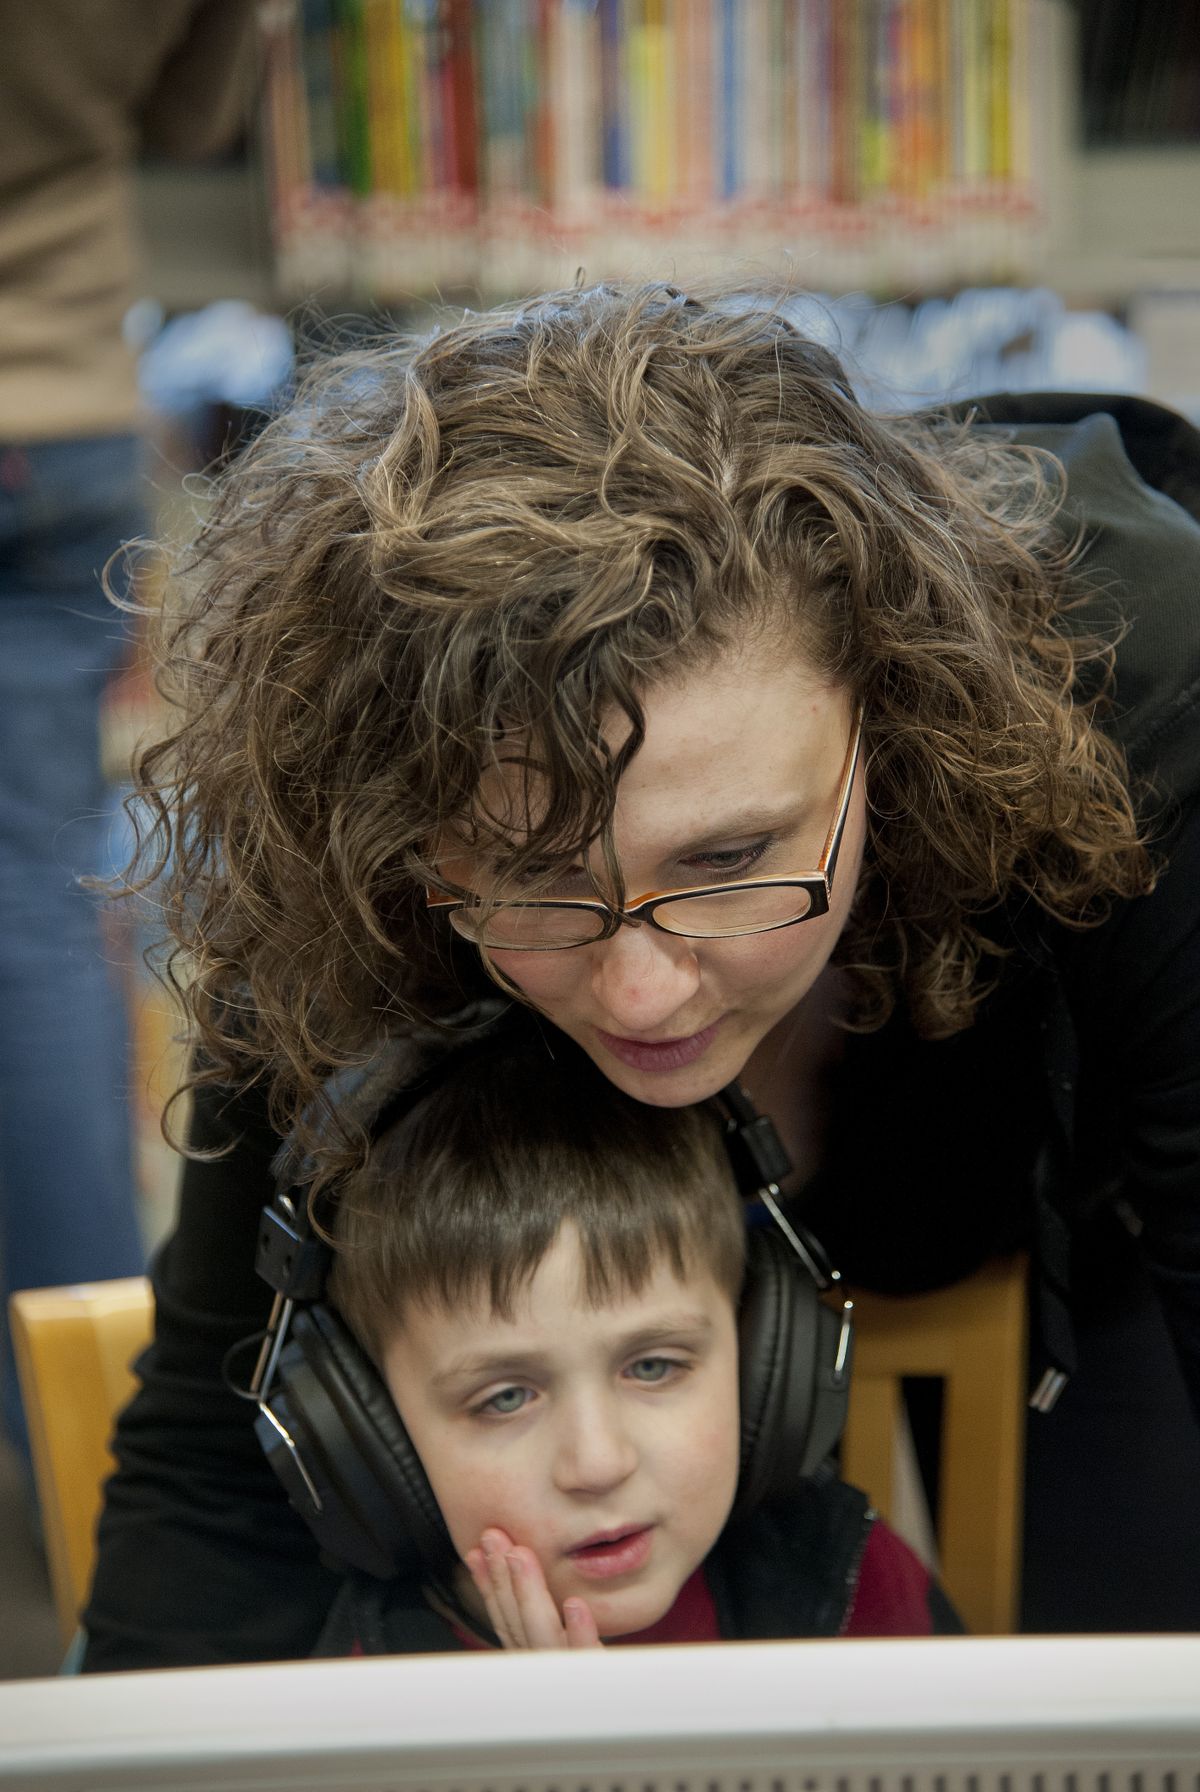 Jaimie Sassone and her son, Hayden, view pbskids.org online at the Spokane Public Library South Hill Branch on Monday. (Dan Pelle)